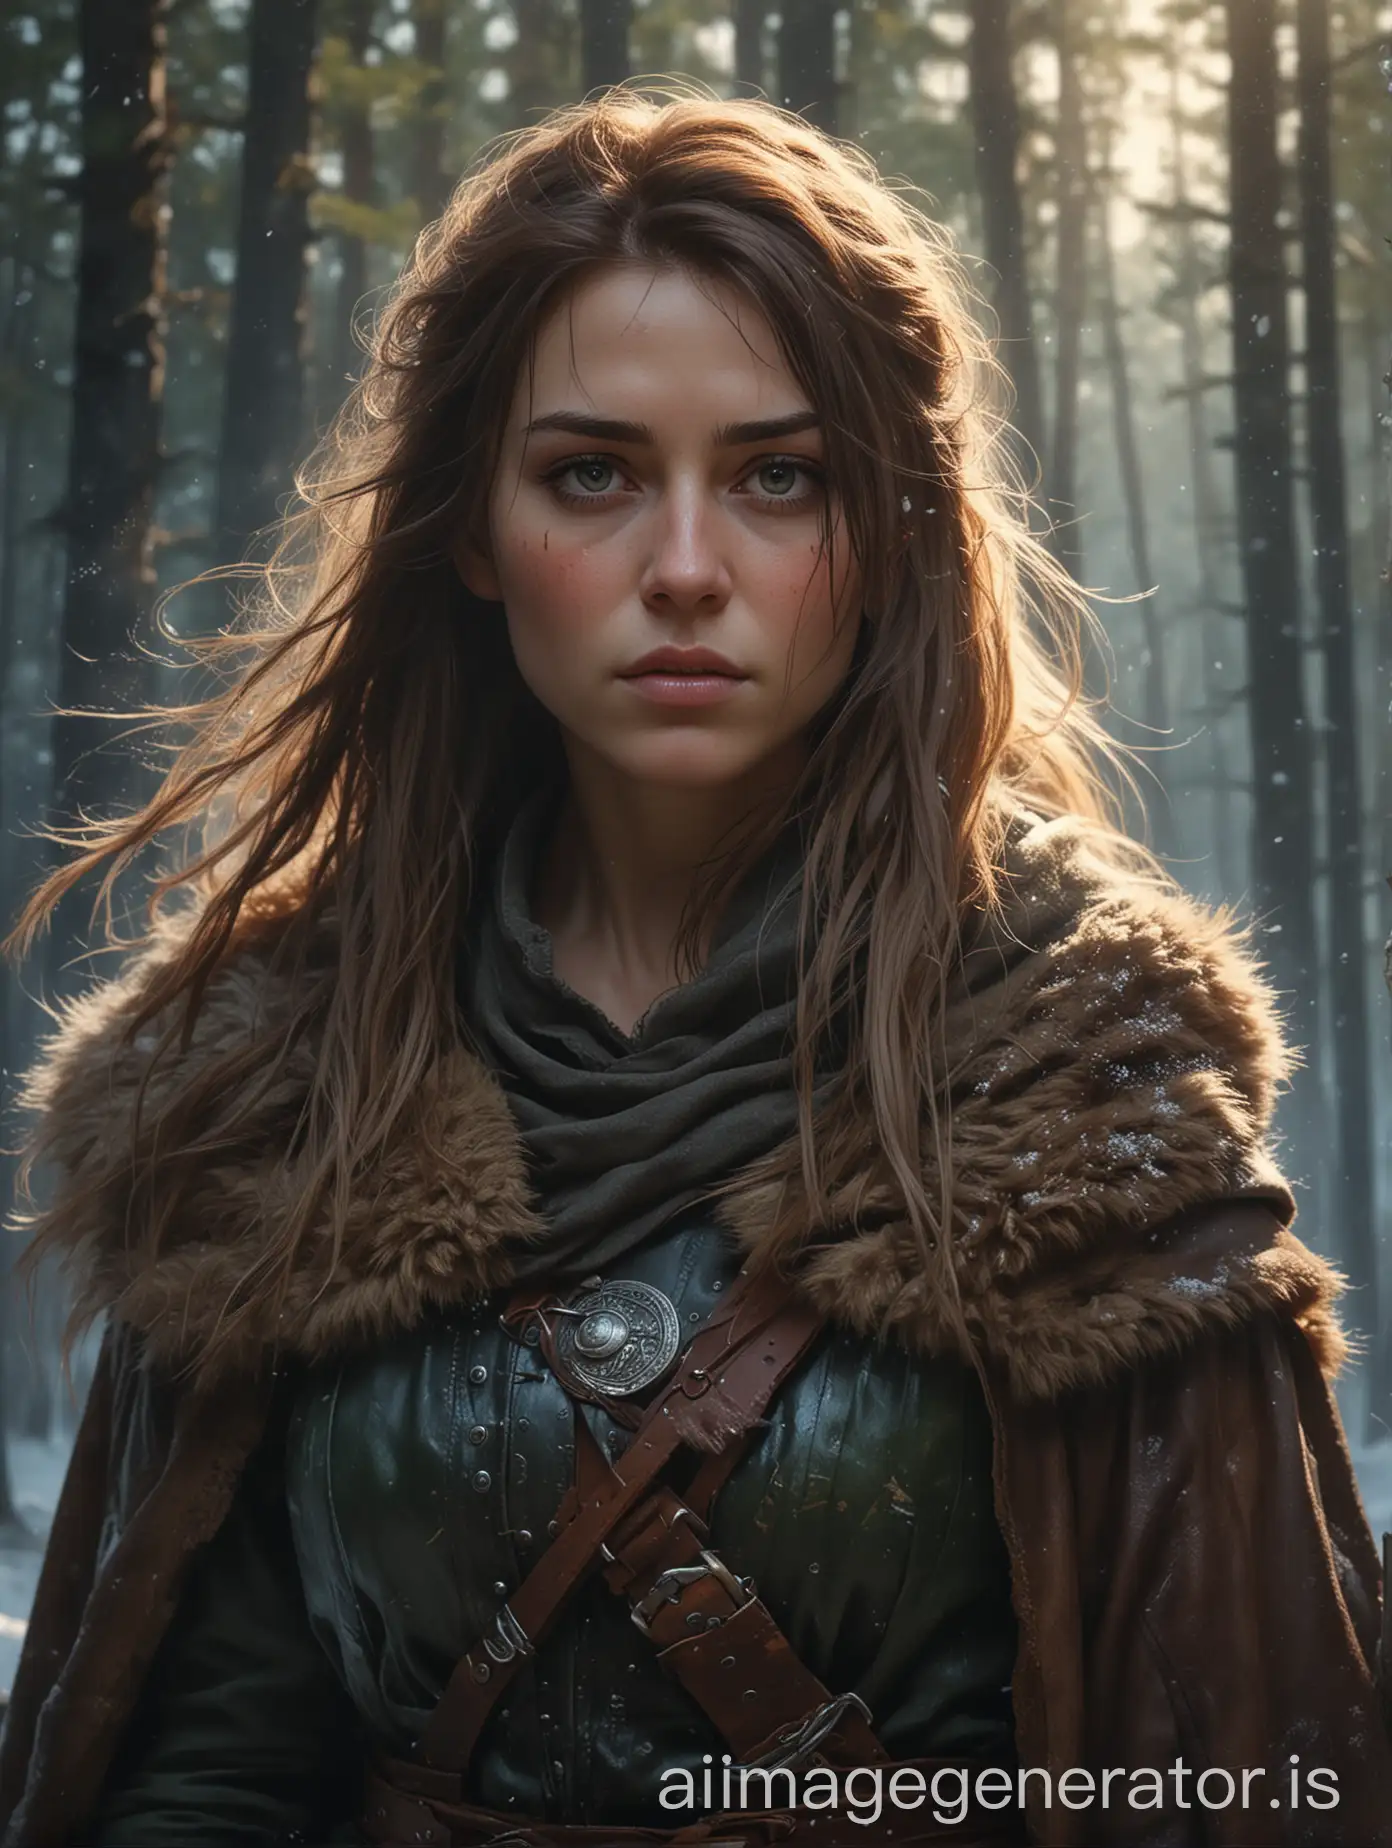 a fierce Viking warrior female, perfect anatomy, perfect face, focus on the eyes, muted make-up, wearing rugged leather armor, fur-lined cloak, perfect eyes, determined look, wind, smoke, light particles, mid-walk pose, snowy ancient Nordic forest, background showcases aurora borealis shimmering in the sky, style of Waterhouse, Repin, Rutkowski, Boris Vallejo, Luis Royo, Makoto Shinkai, Jamie Wyeth, James Gilleard, Edward Hopper, Greg Rutkowski, volumetric lighting, acrylic painting, palette knife and brush strokes, 16k